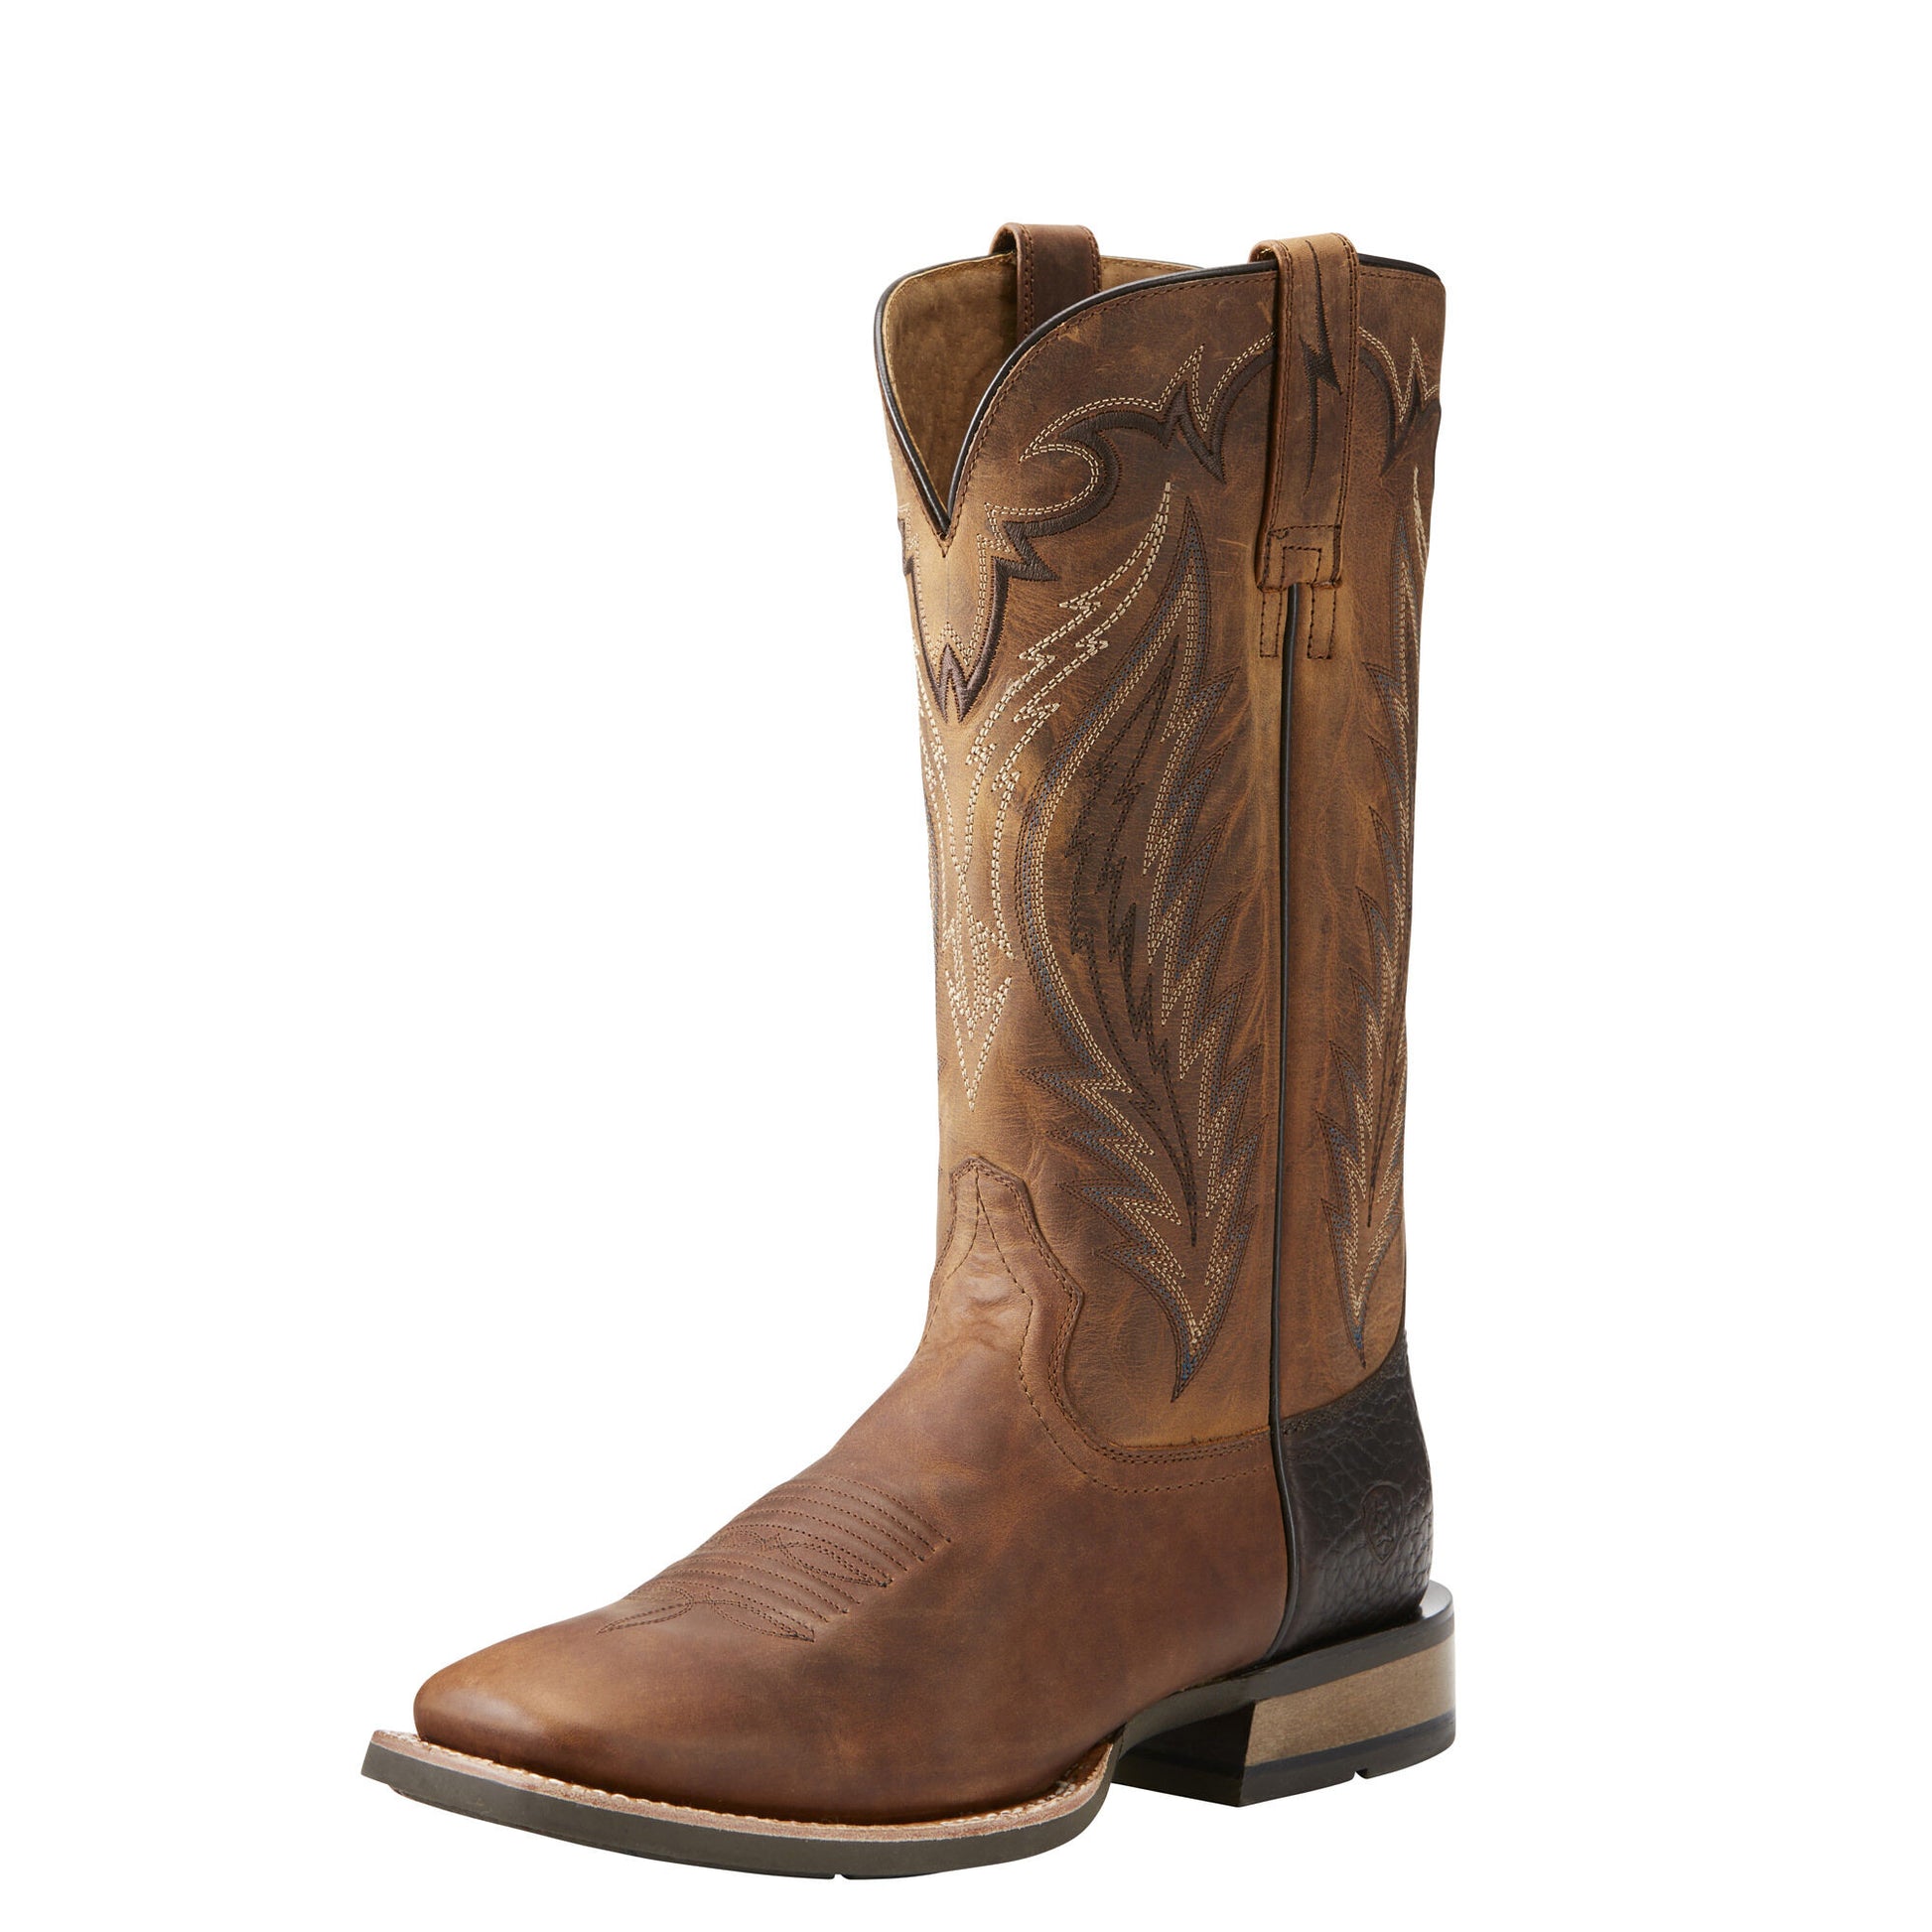 Ariat Men's Top Hand Western Boot - Trusty Tan - French's Boots